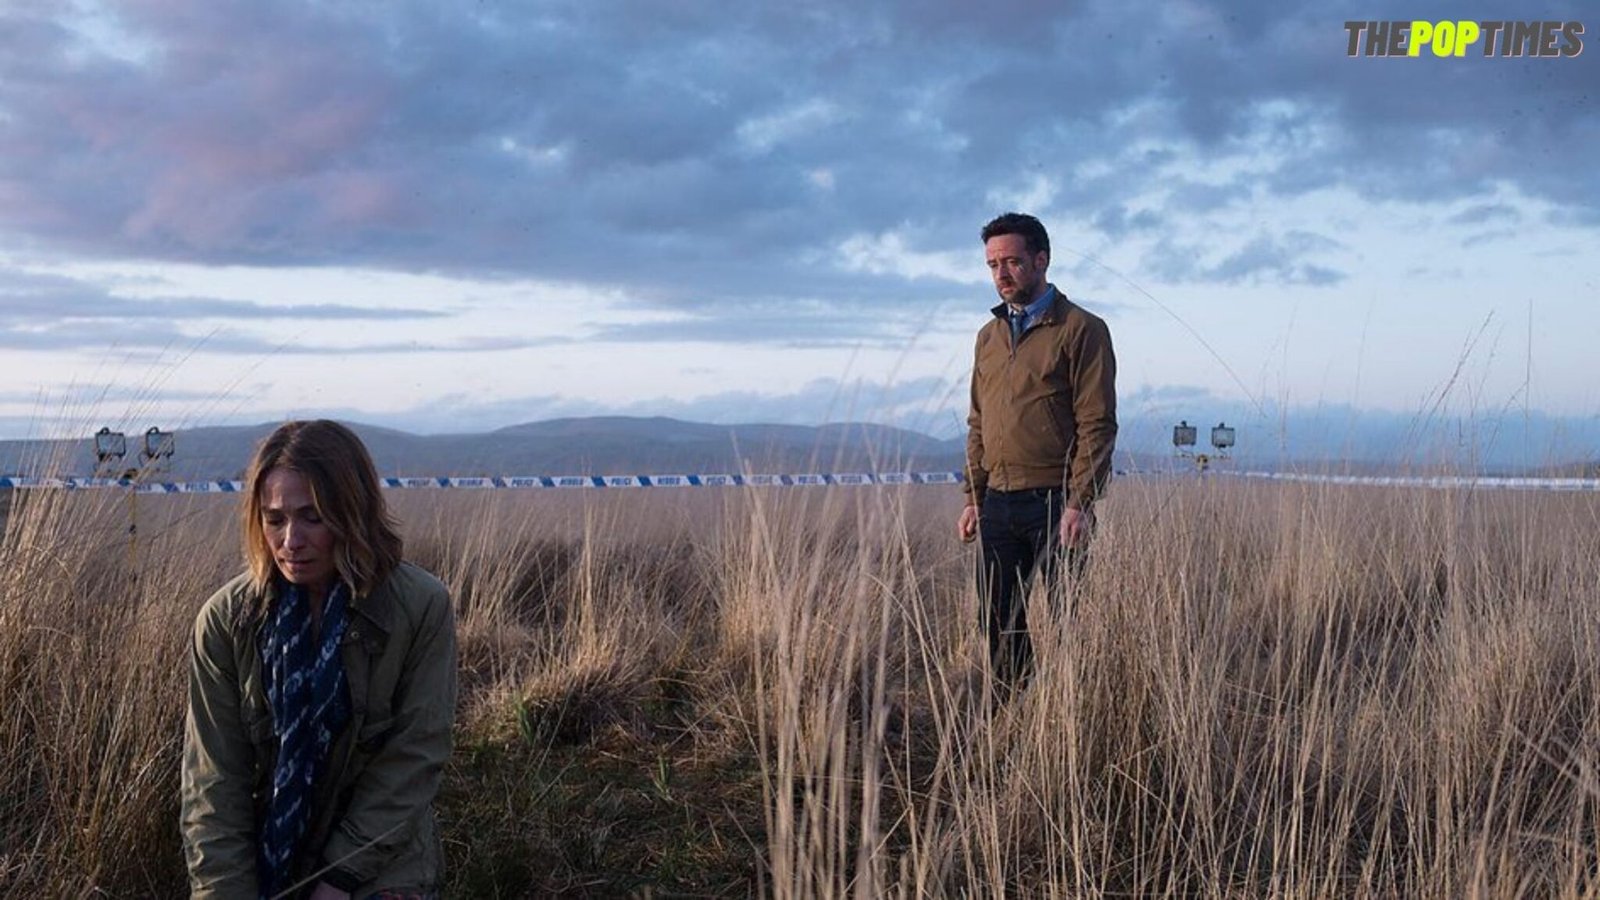 Hinterland Season 4 Release Date And Details! ThePopTimes